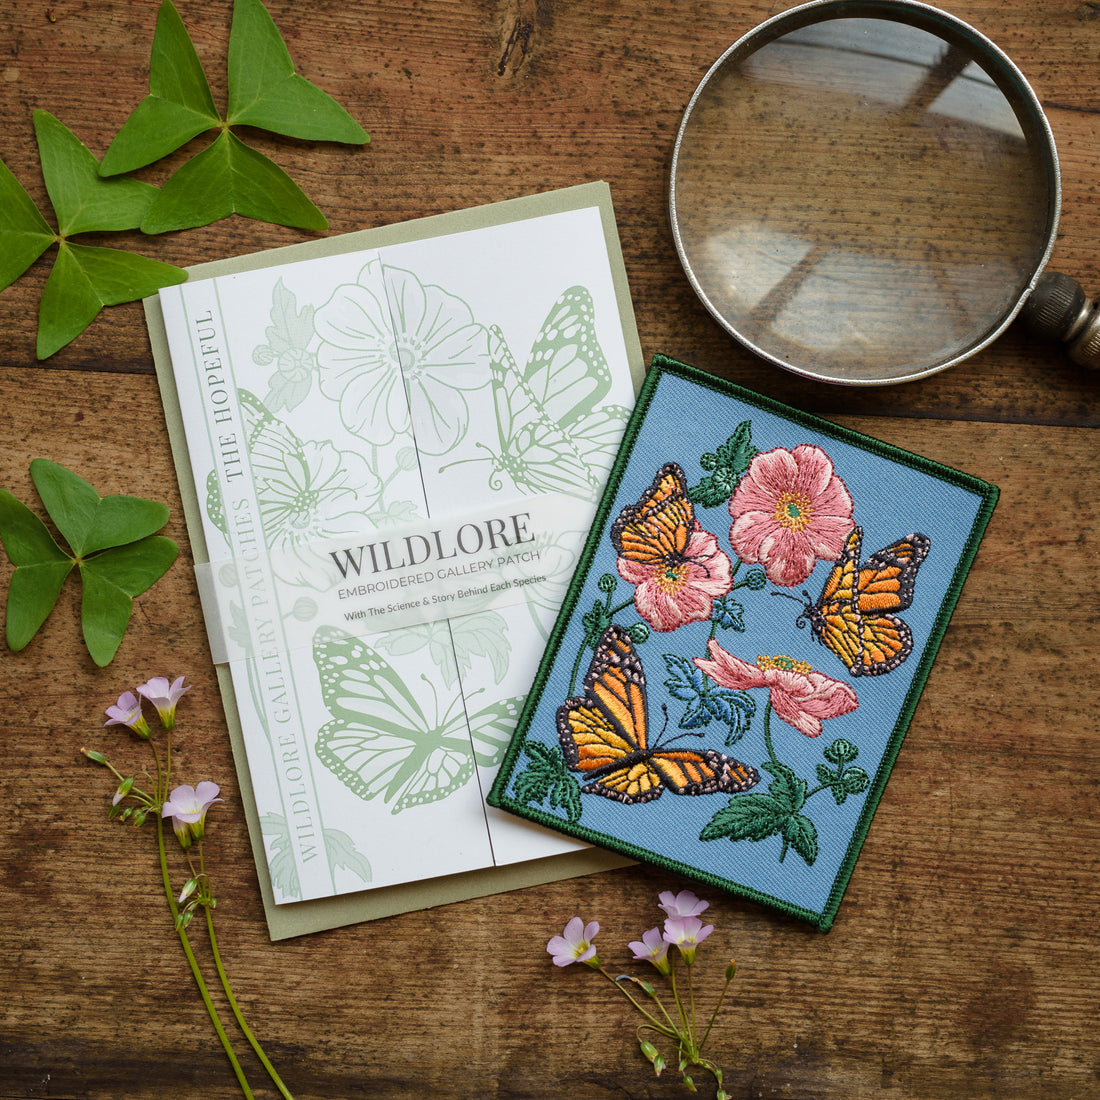 Monarch butterfly and Anemone flower Embroidered Patch in gatefold card with science and story behind the species